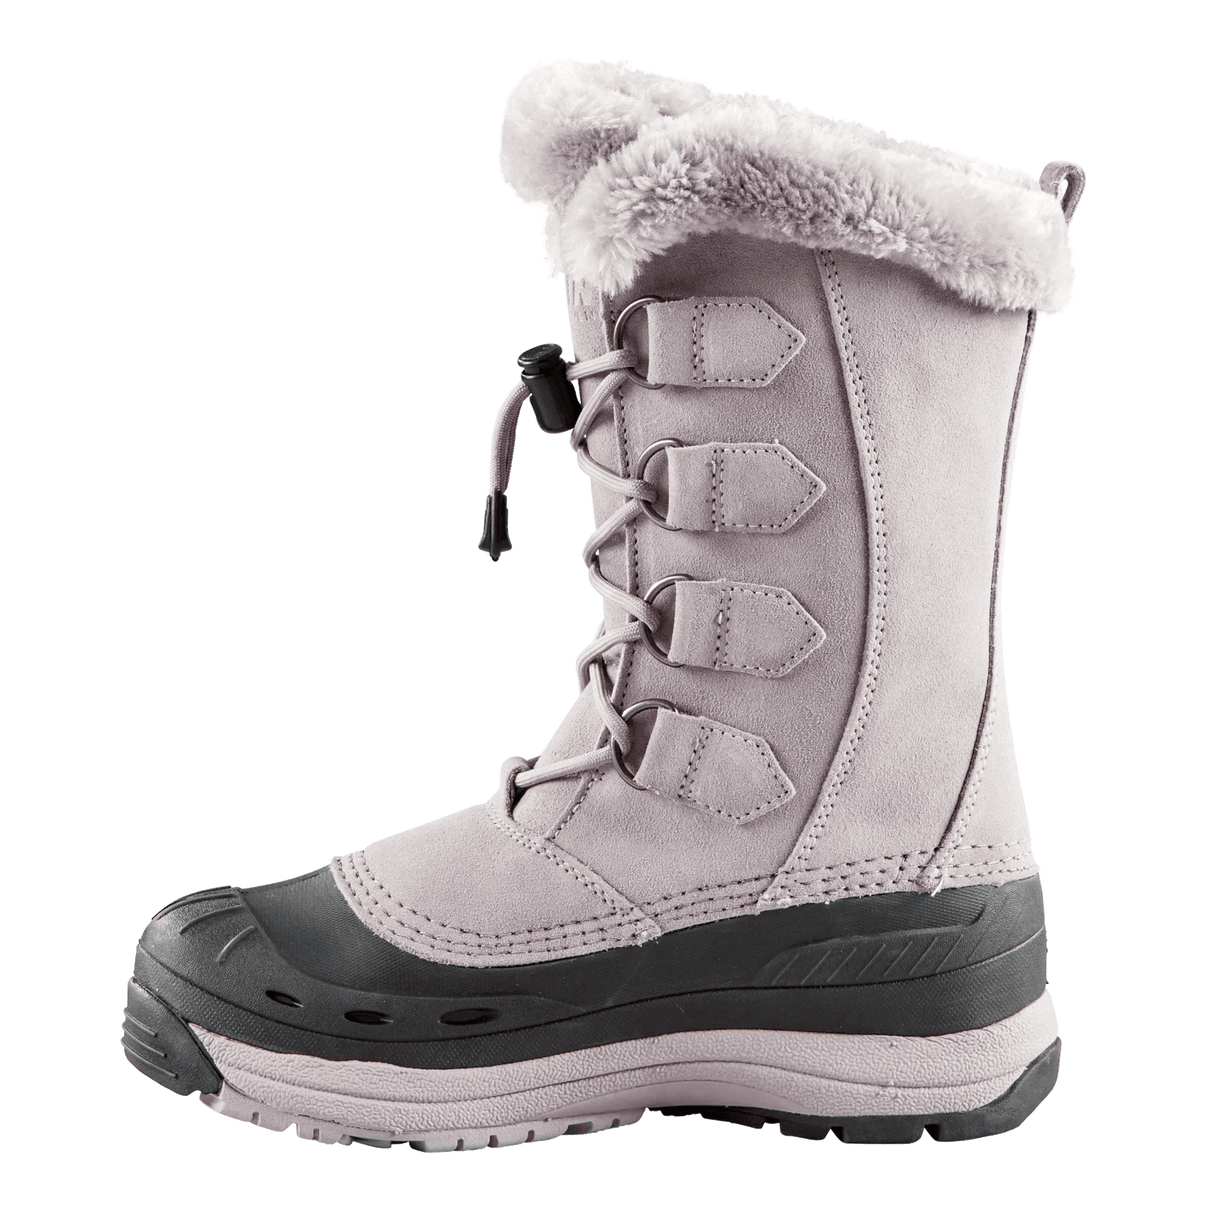 Baffin Women's Chloe Winter Boots - A&M Clothing & Shoes